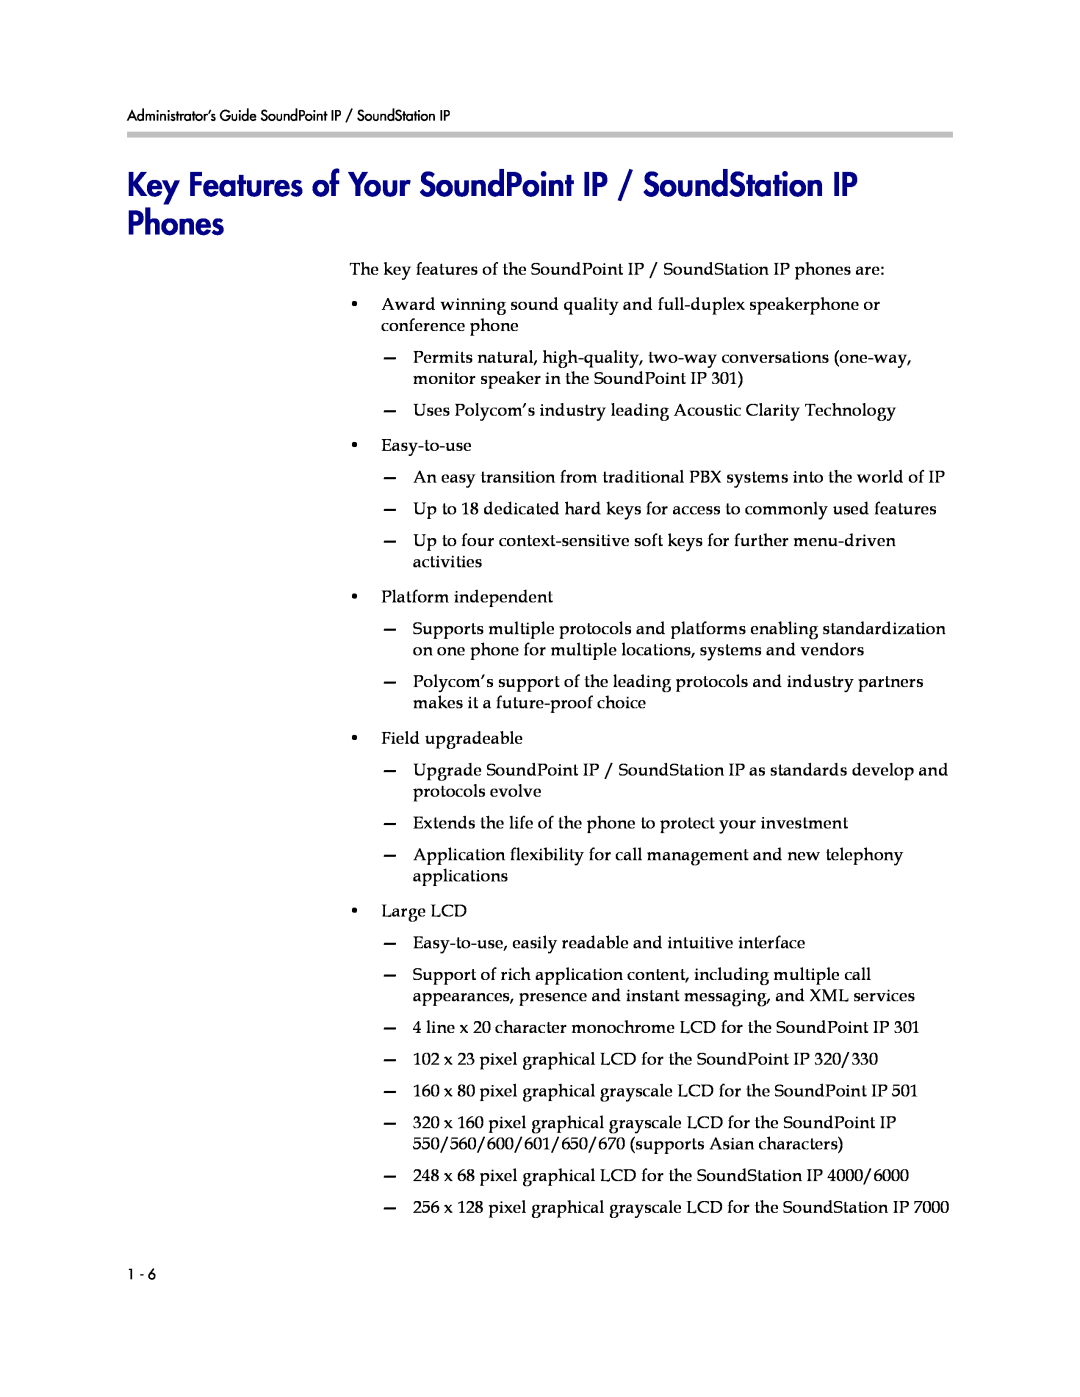 Polycom SIP 3.1 manual Key Features of Your SoundPoint IP / SoundStation IP Phones 